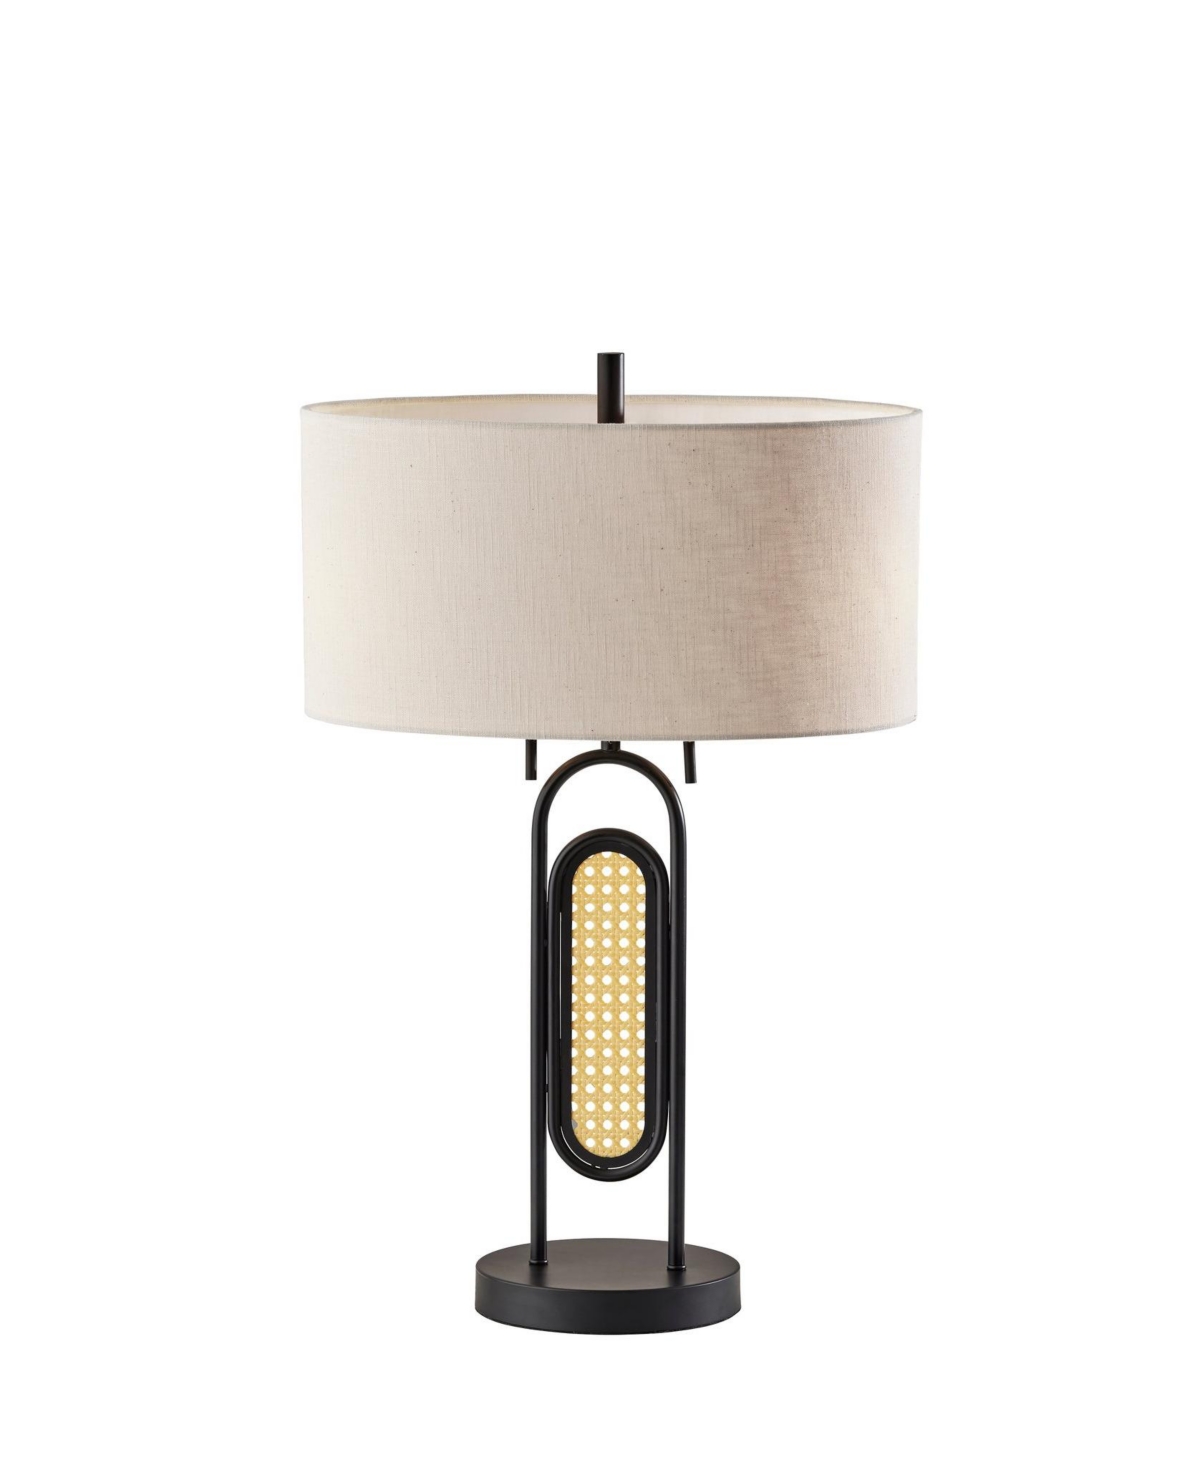 Adesso Levy Table Lamp In Black With Webbed Caning Material